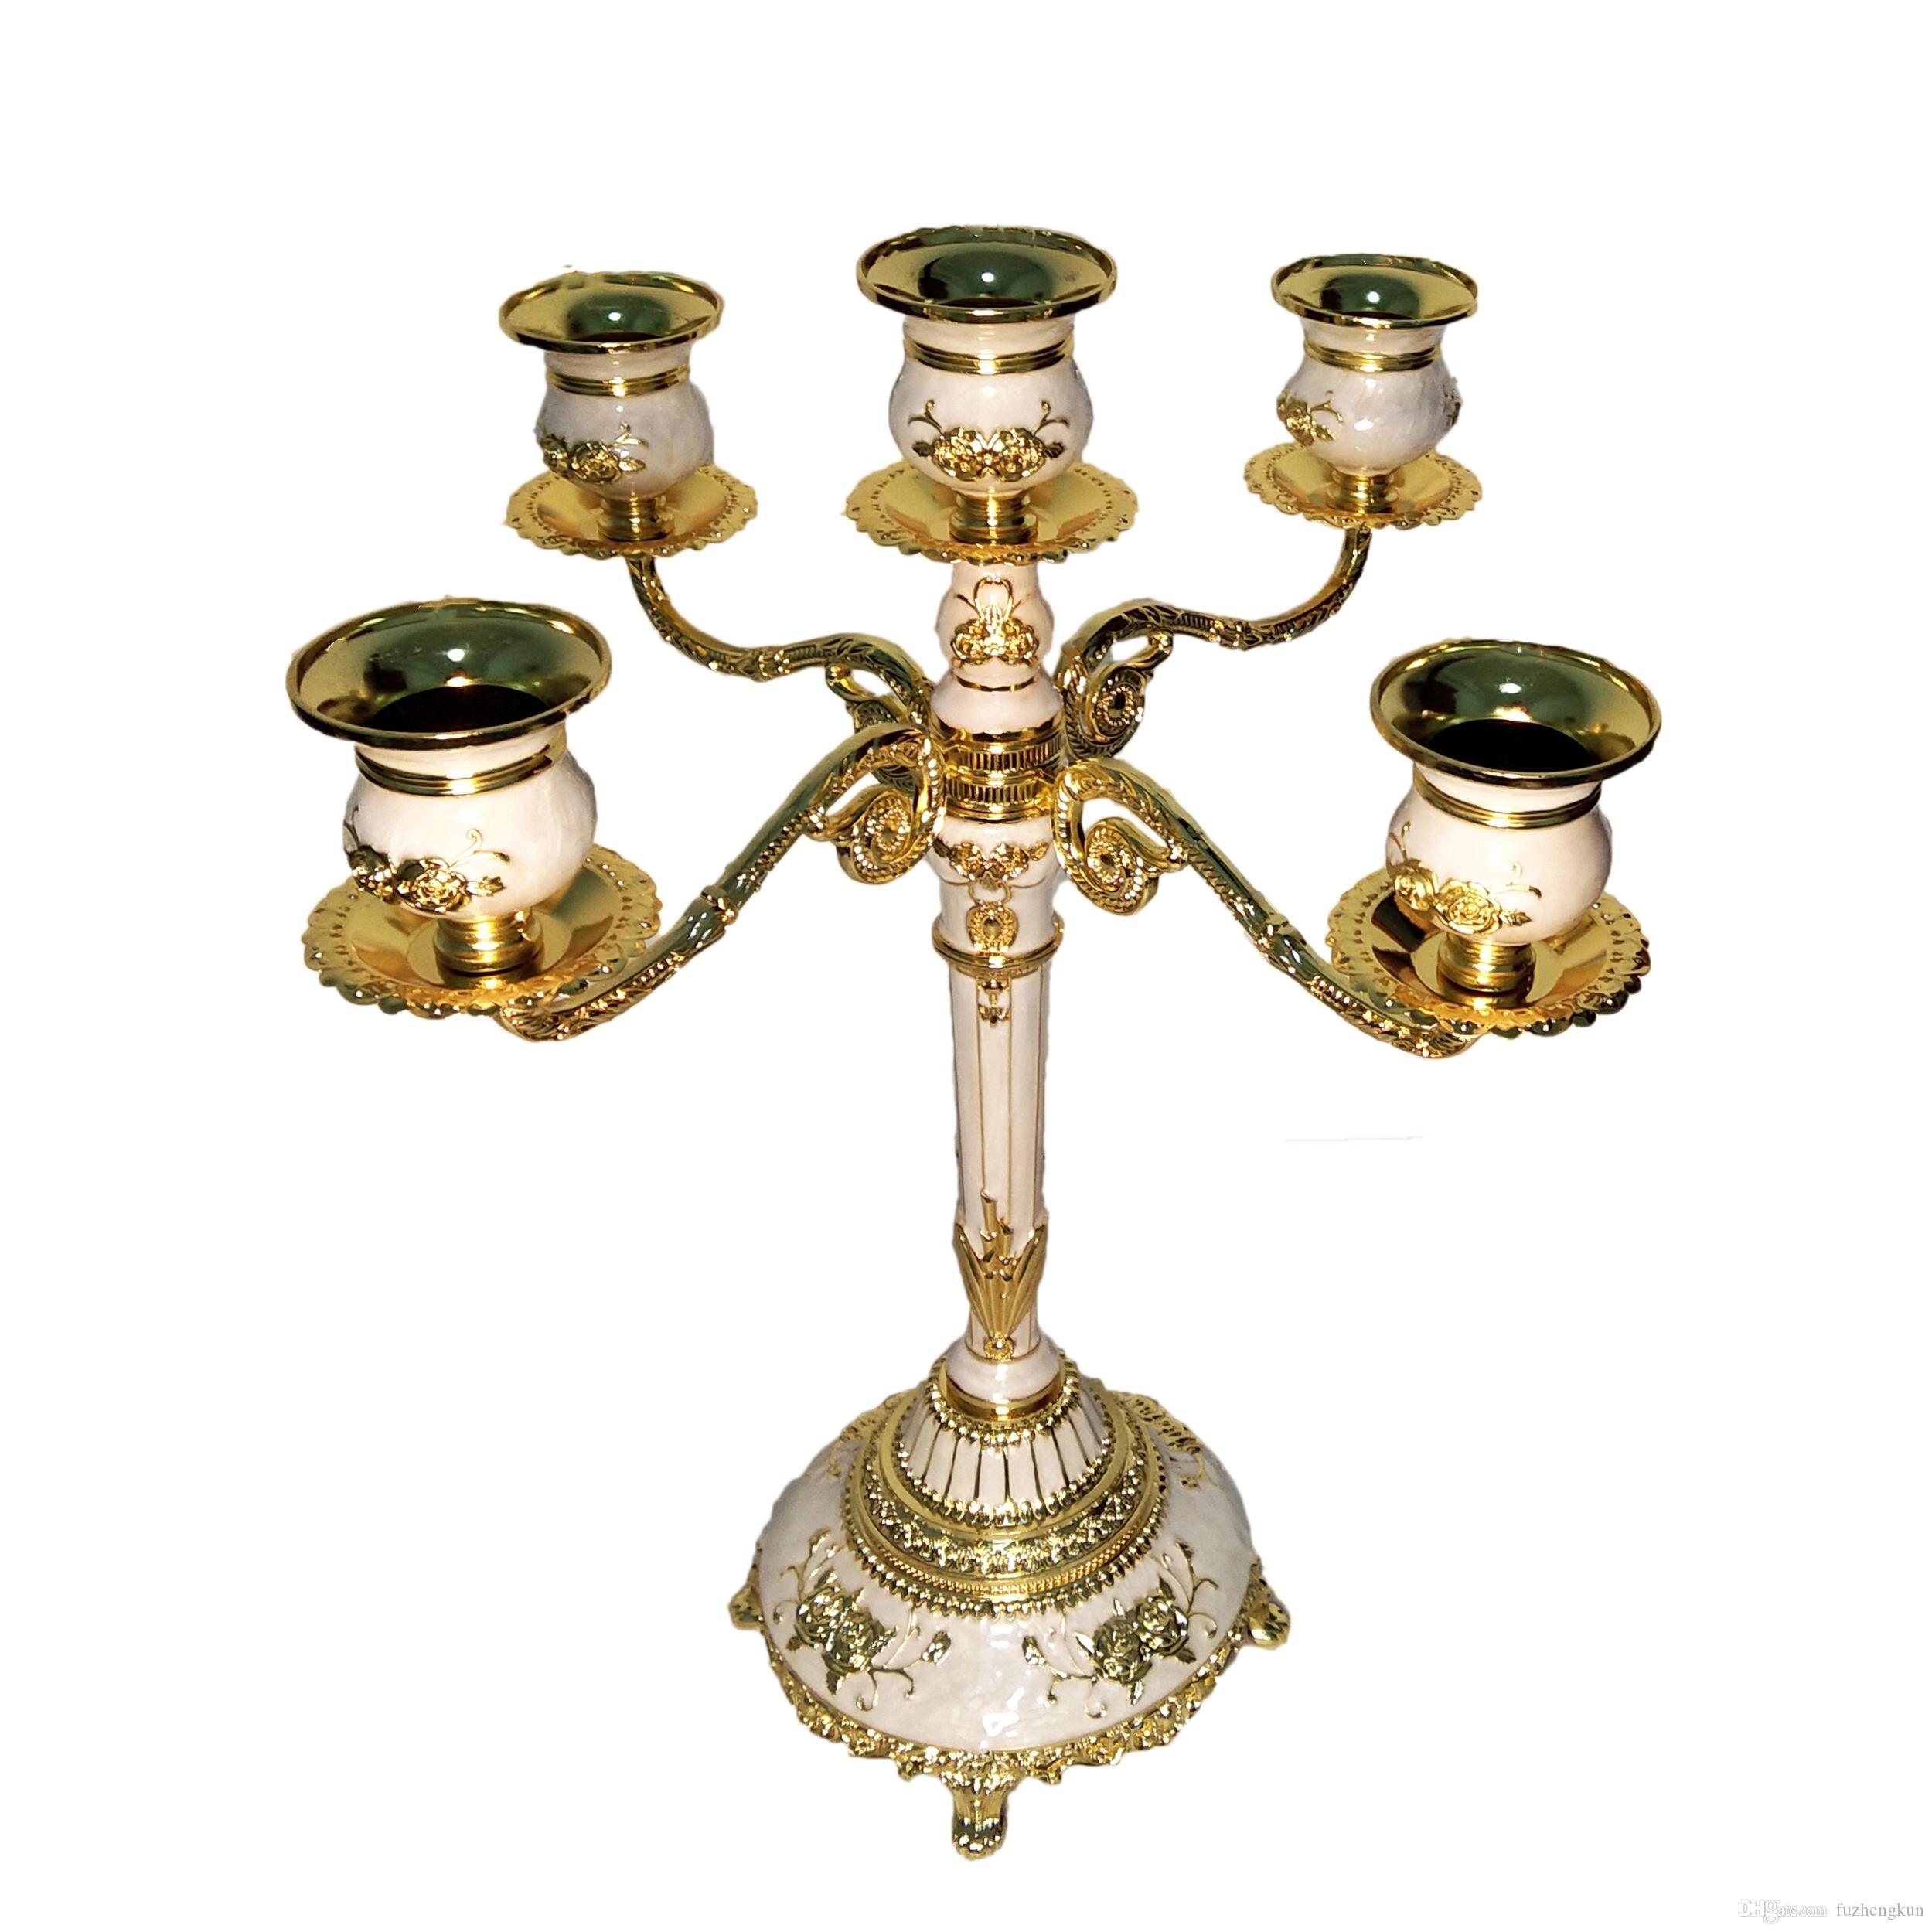 Fireplace Candle Holder New Candle Holders 5 Arms Shiny Golden Plated Candelabra Romantic and Luxury Metal for Wedding events Party Home Table Decoration Candle Holders for